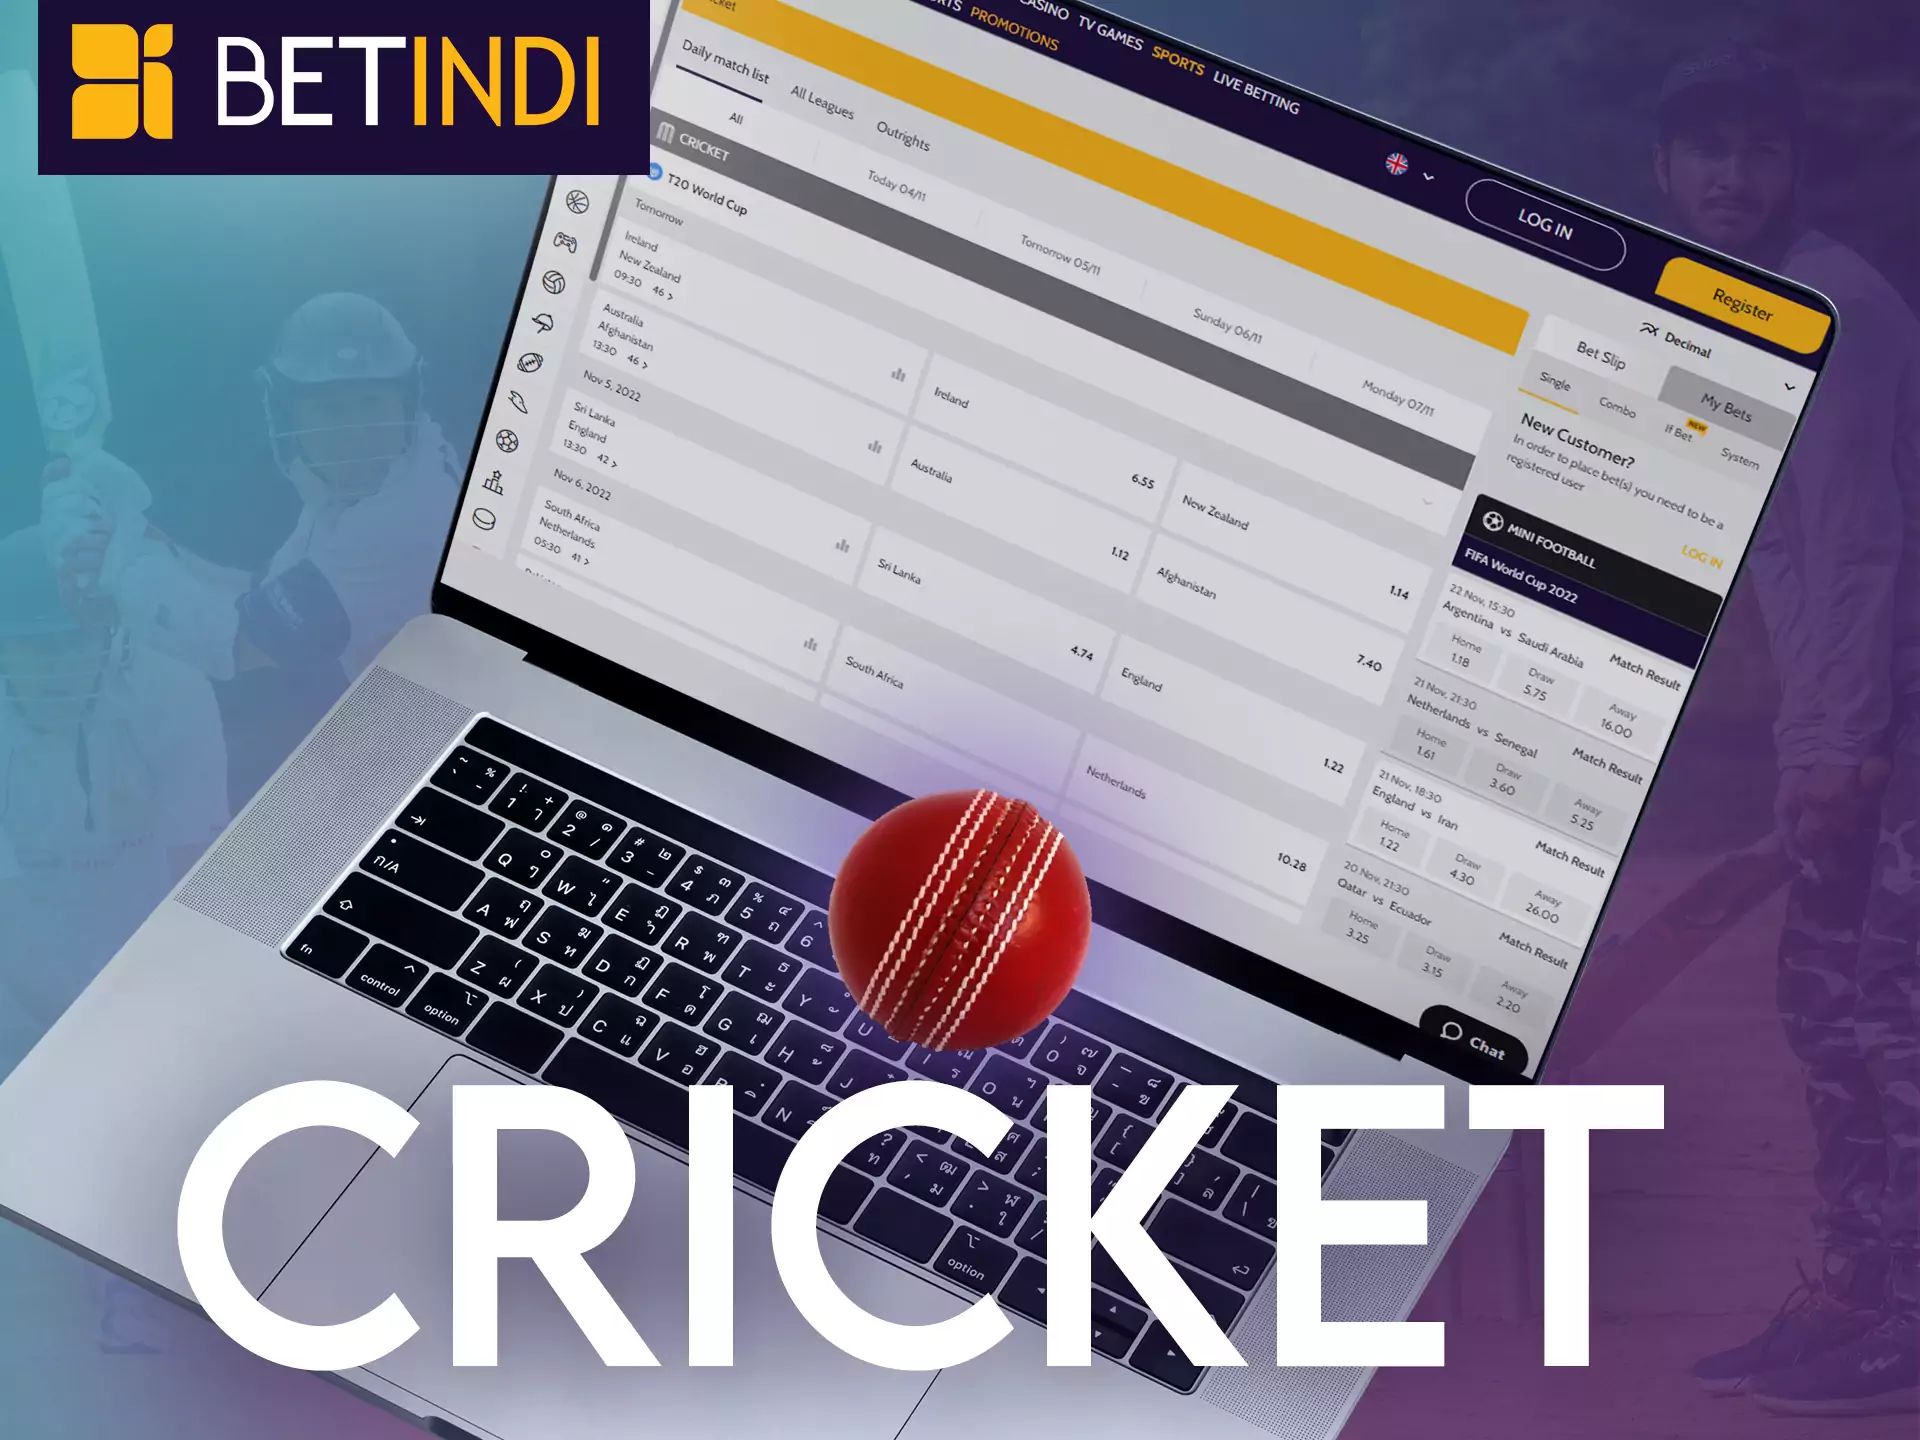 Place bets on cricket with Betindi and enjoy the game.